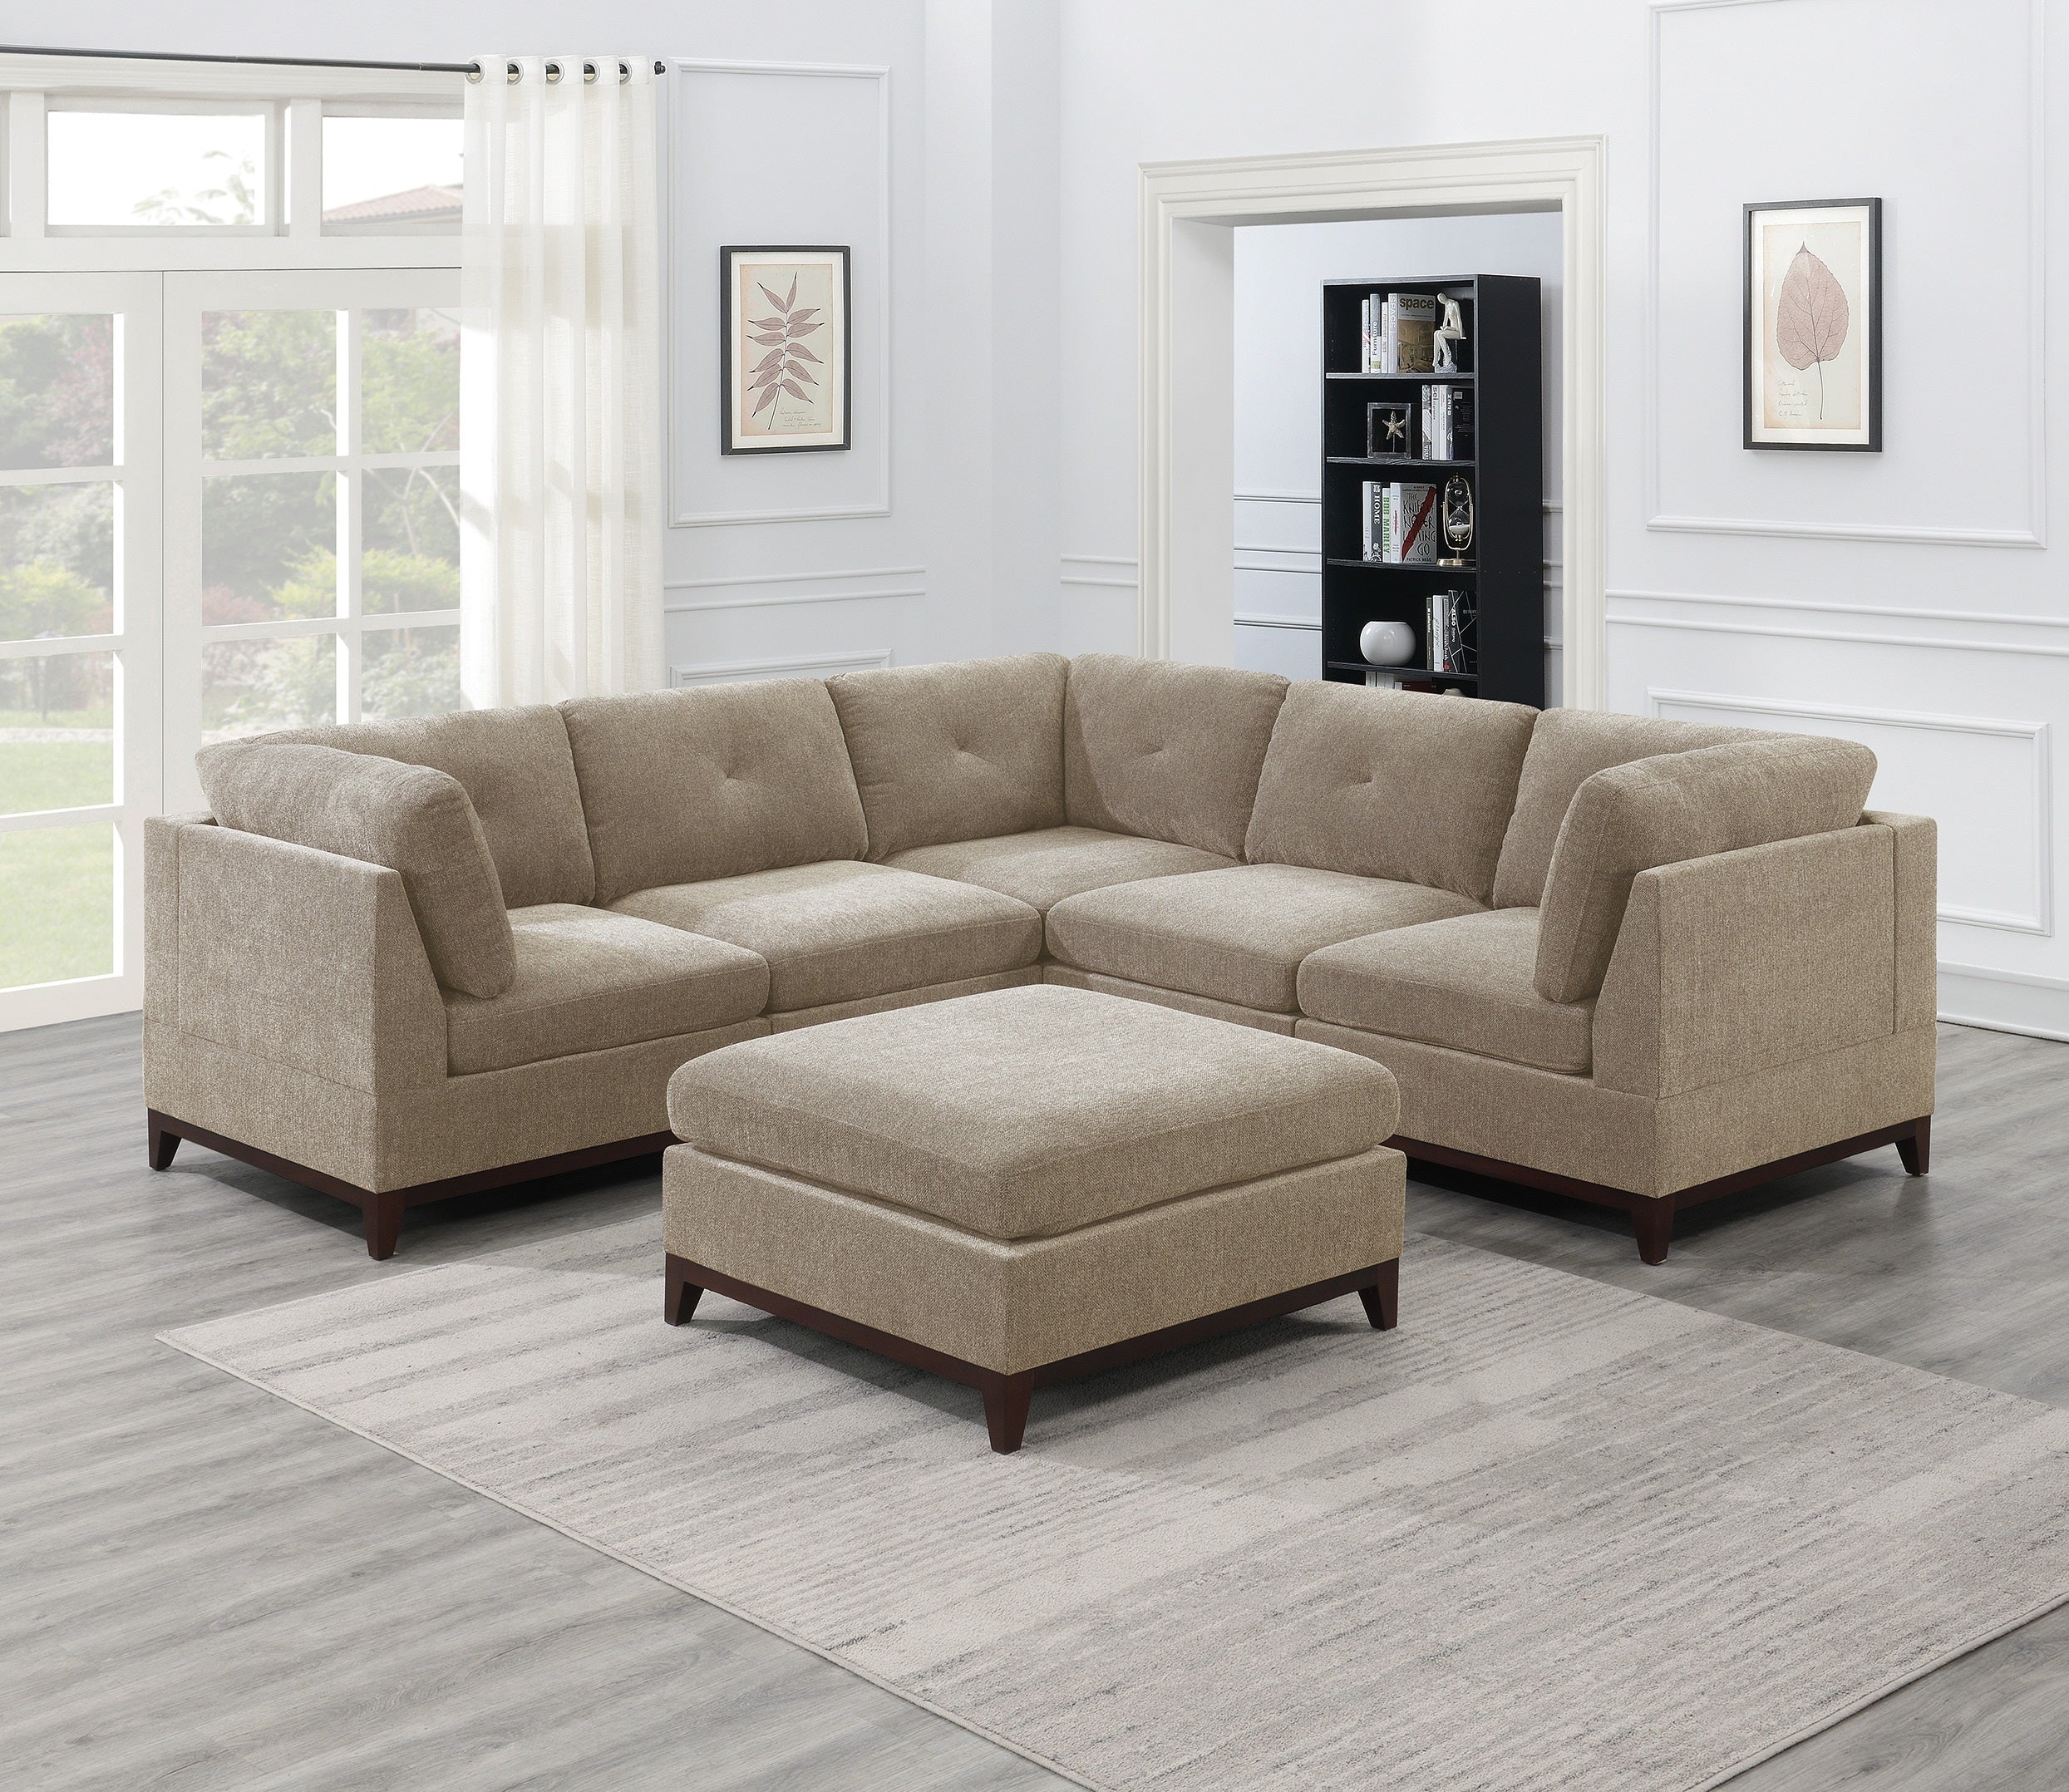 6-Piece Tufted Camel Brown Chenille Modular Sectional